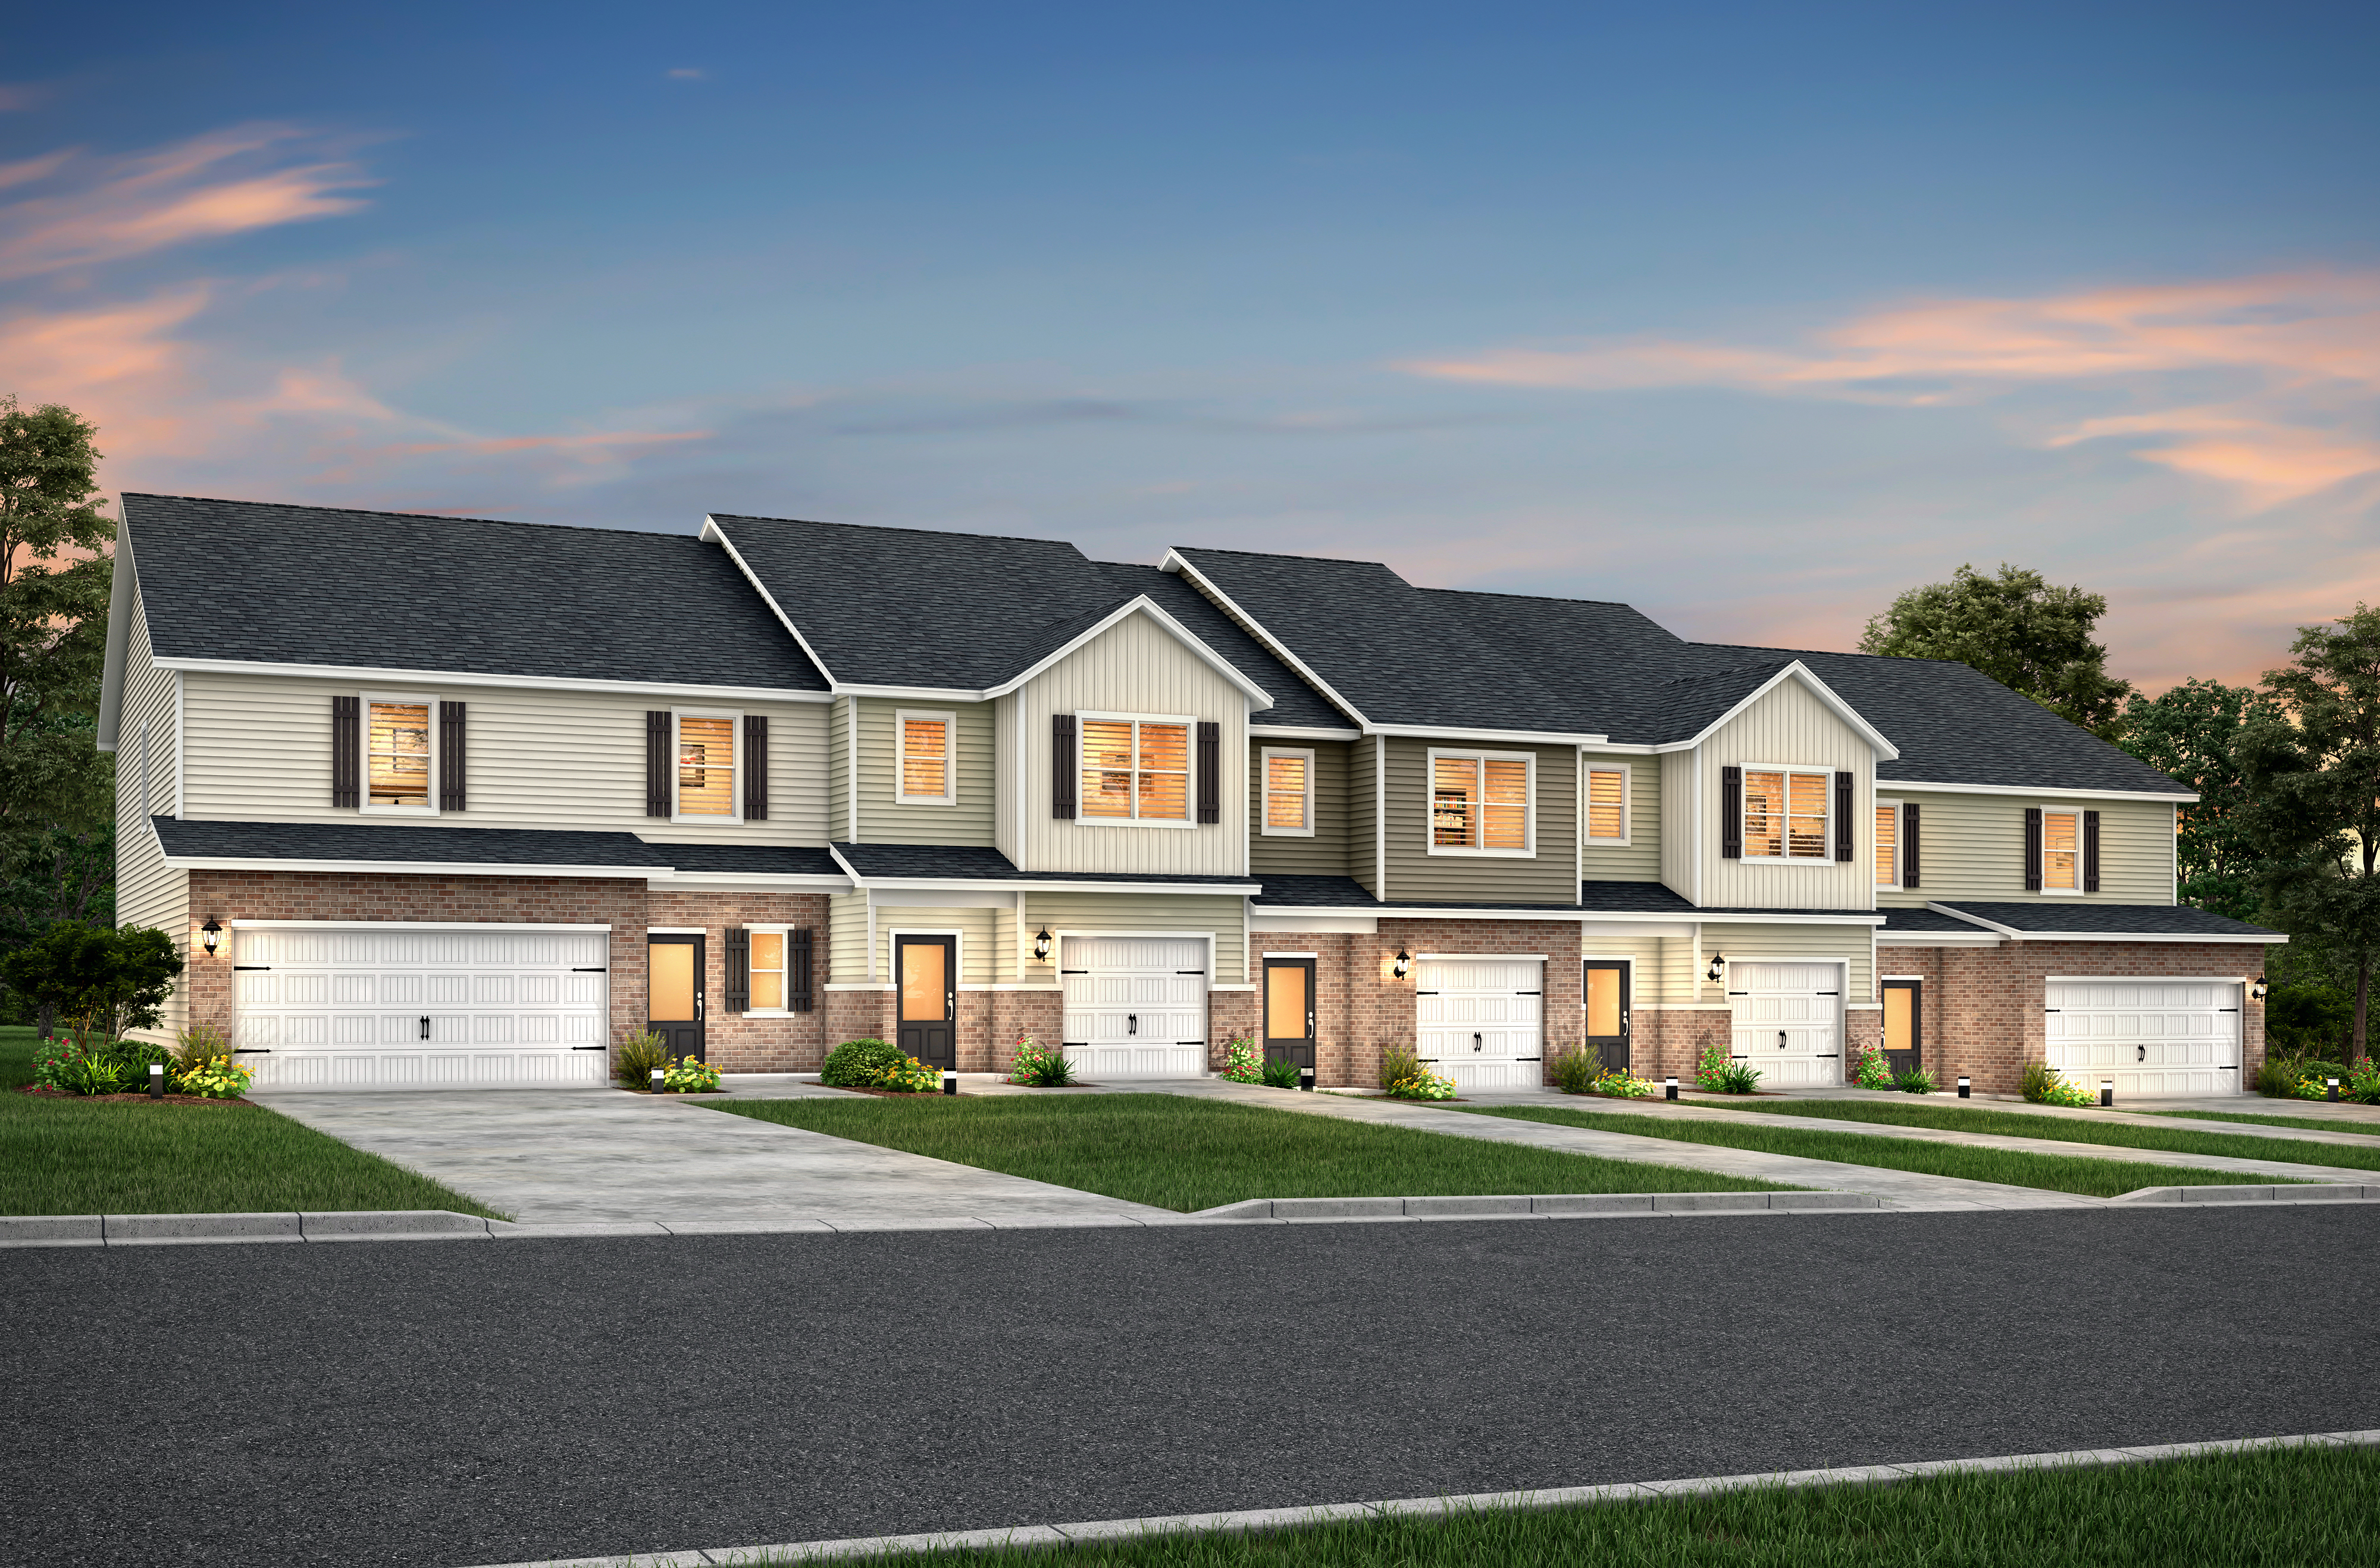 New townhomes at West Hills by LGI Homes